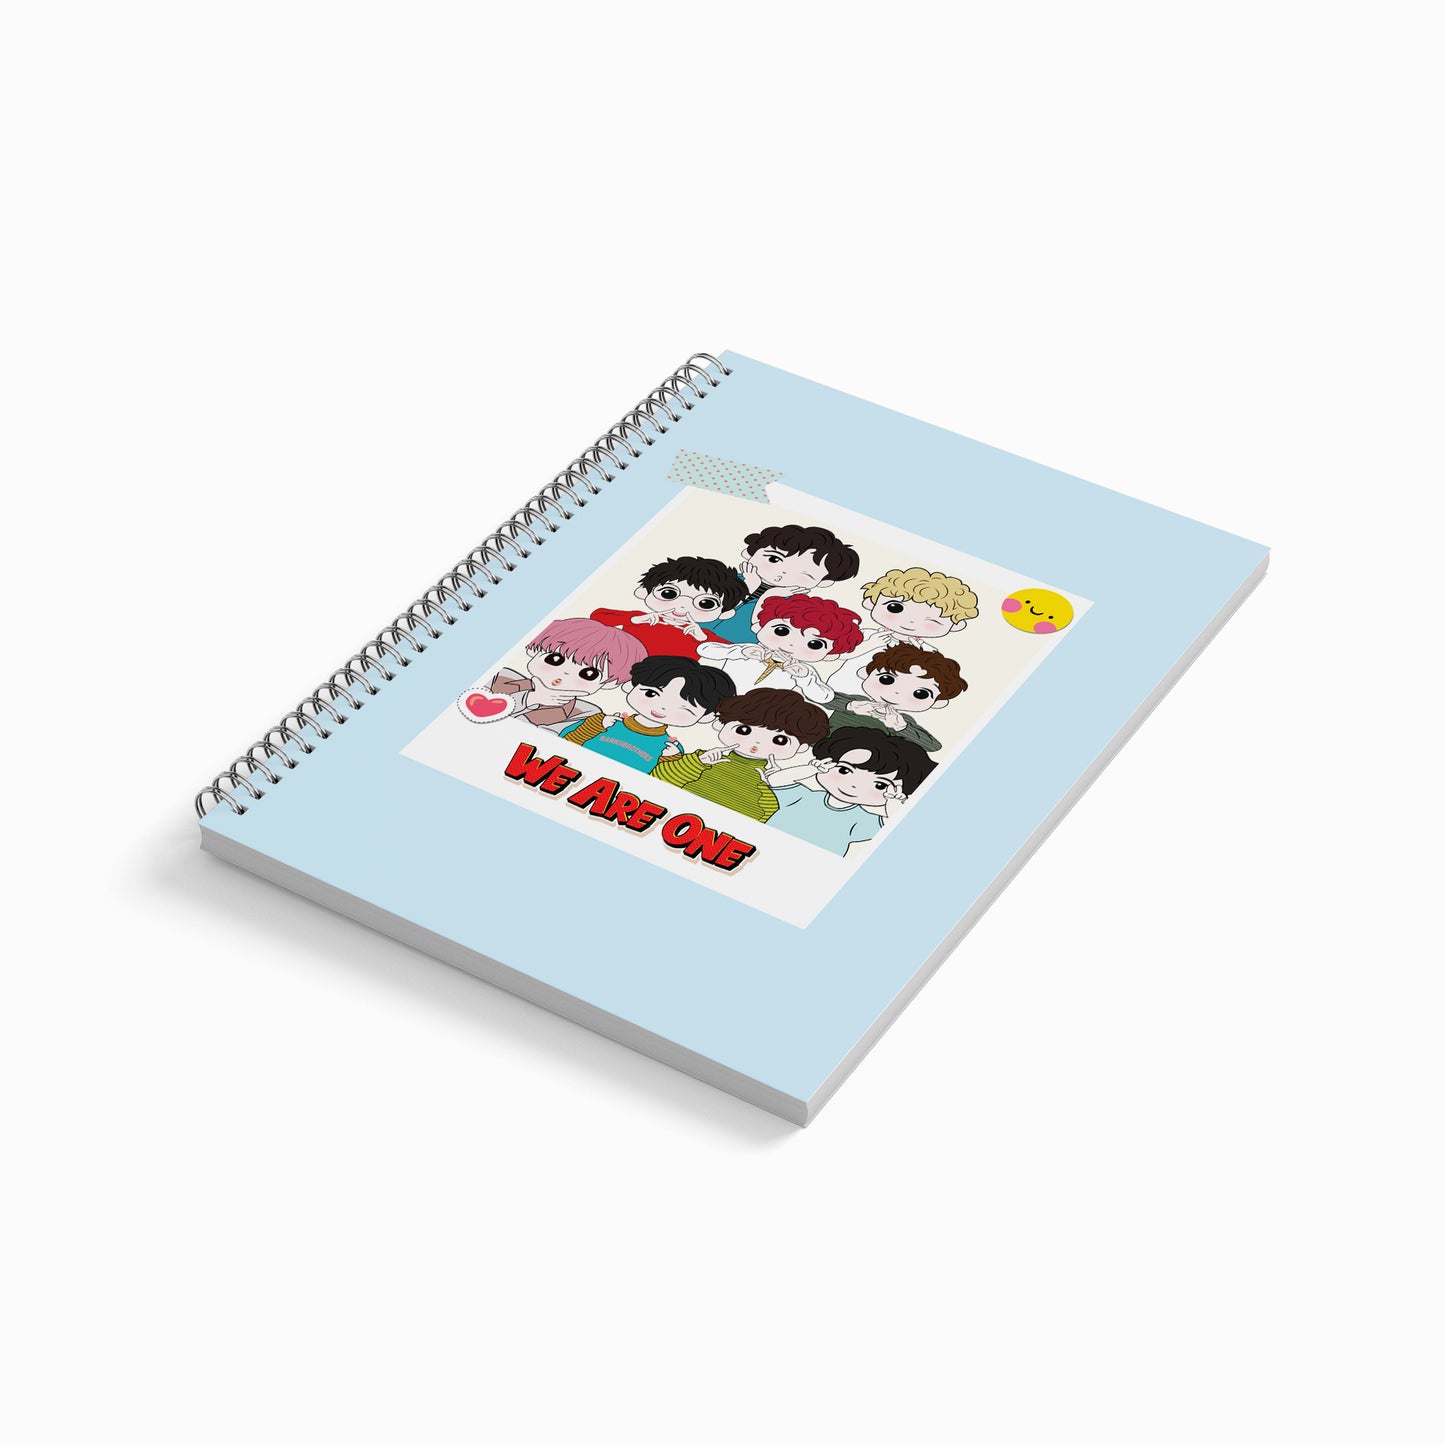 EXO We Are One Notebook